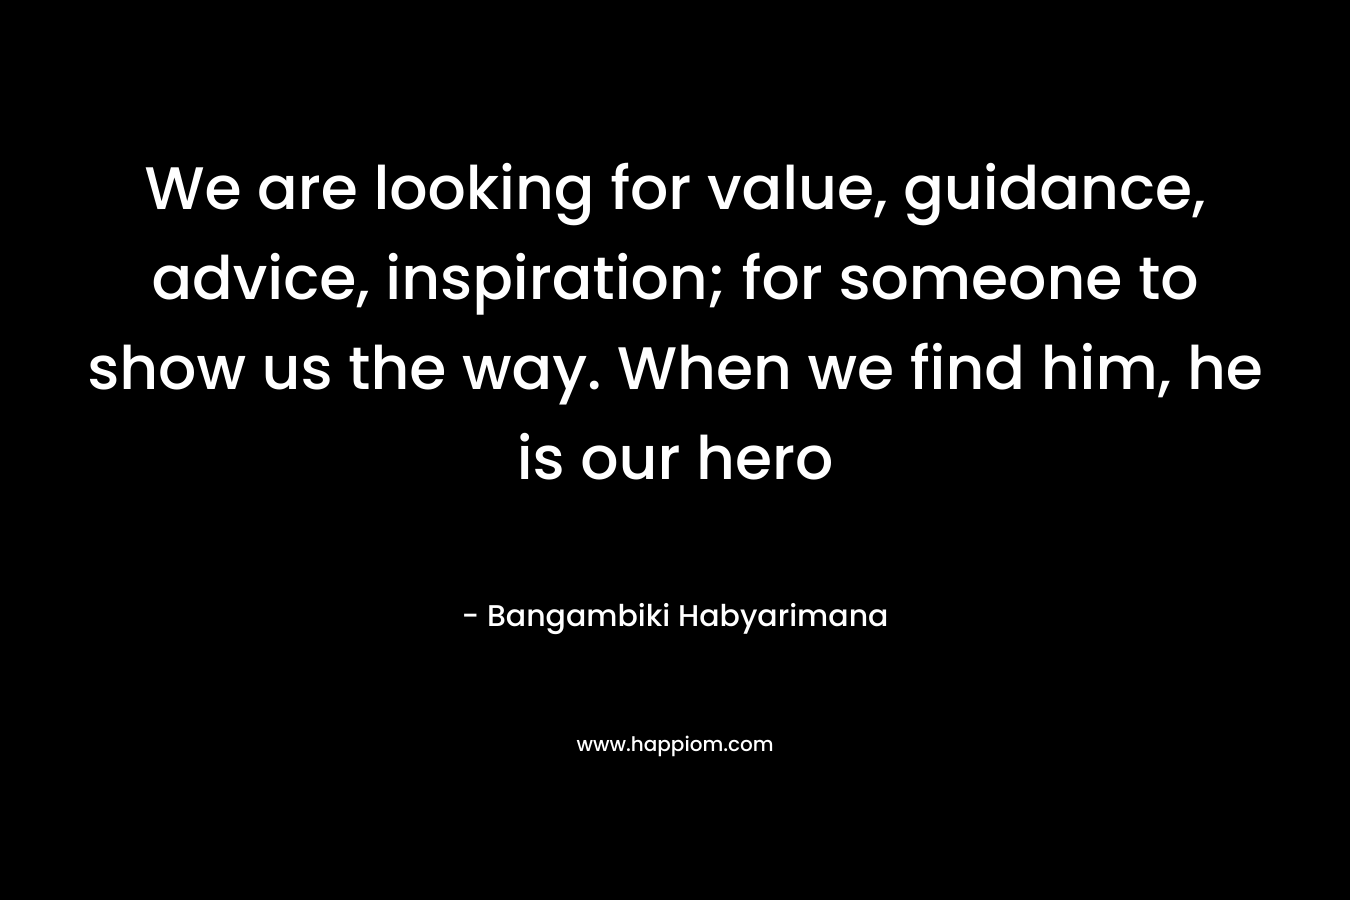 We are looking for value, guidance, advice, inspiration; for someone to show us the way. When we find him, he is our hero